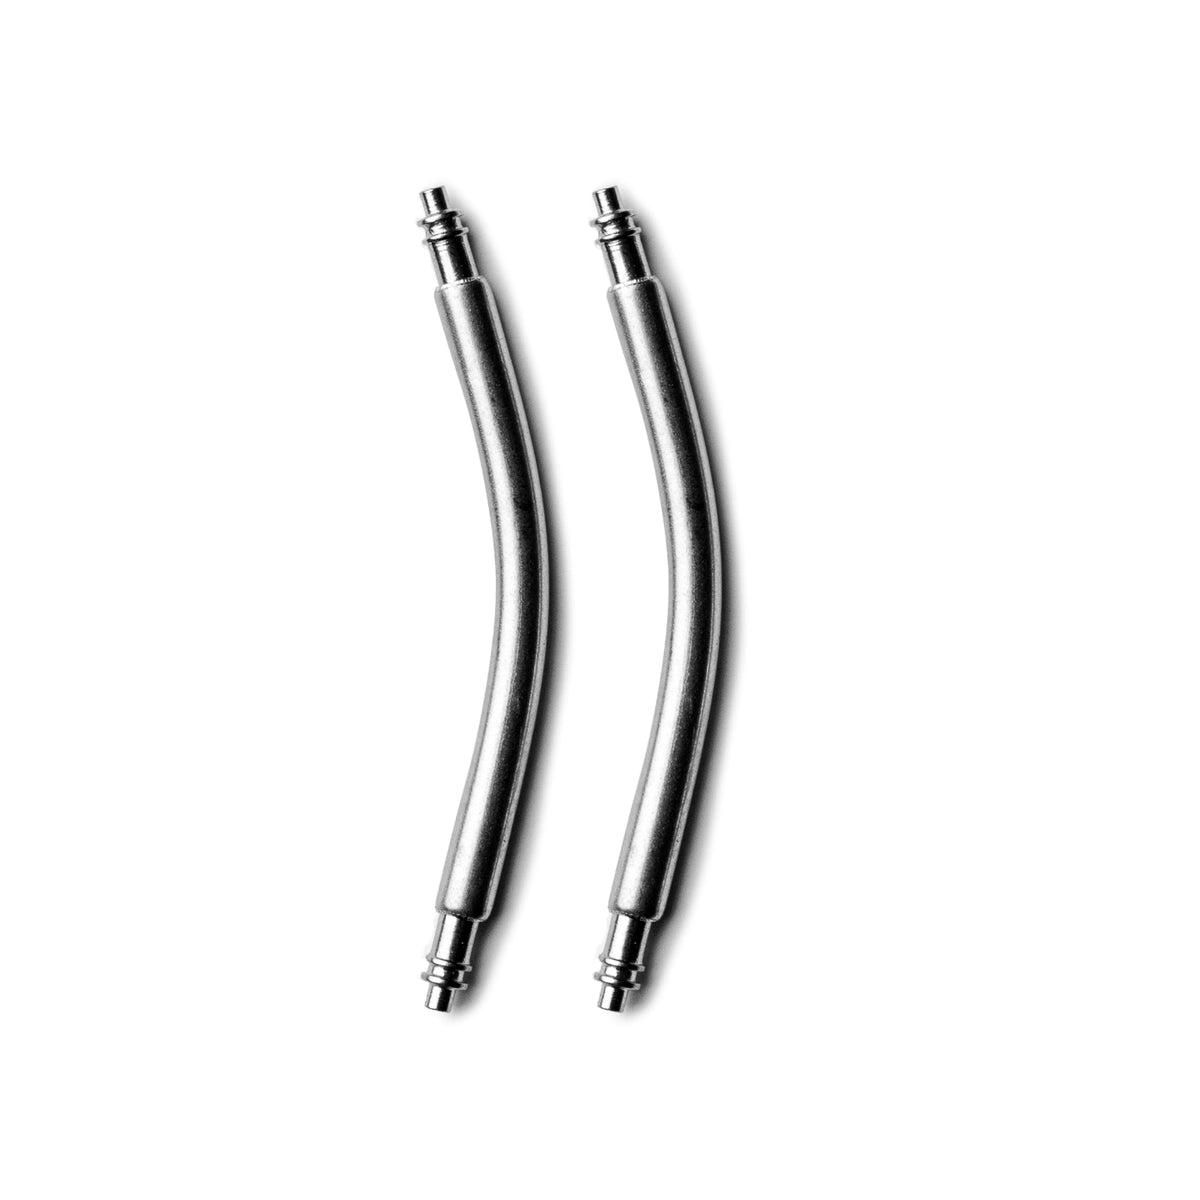 1.7MM CURVED SPRING BARS - PACK OF 2